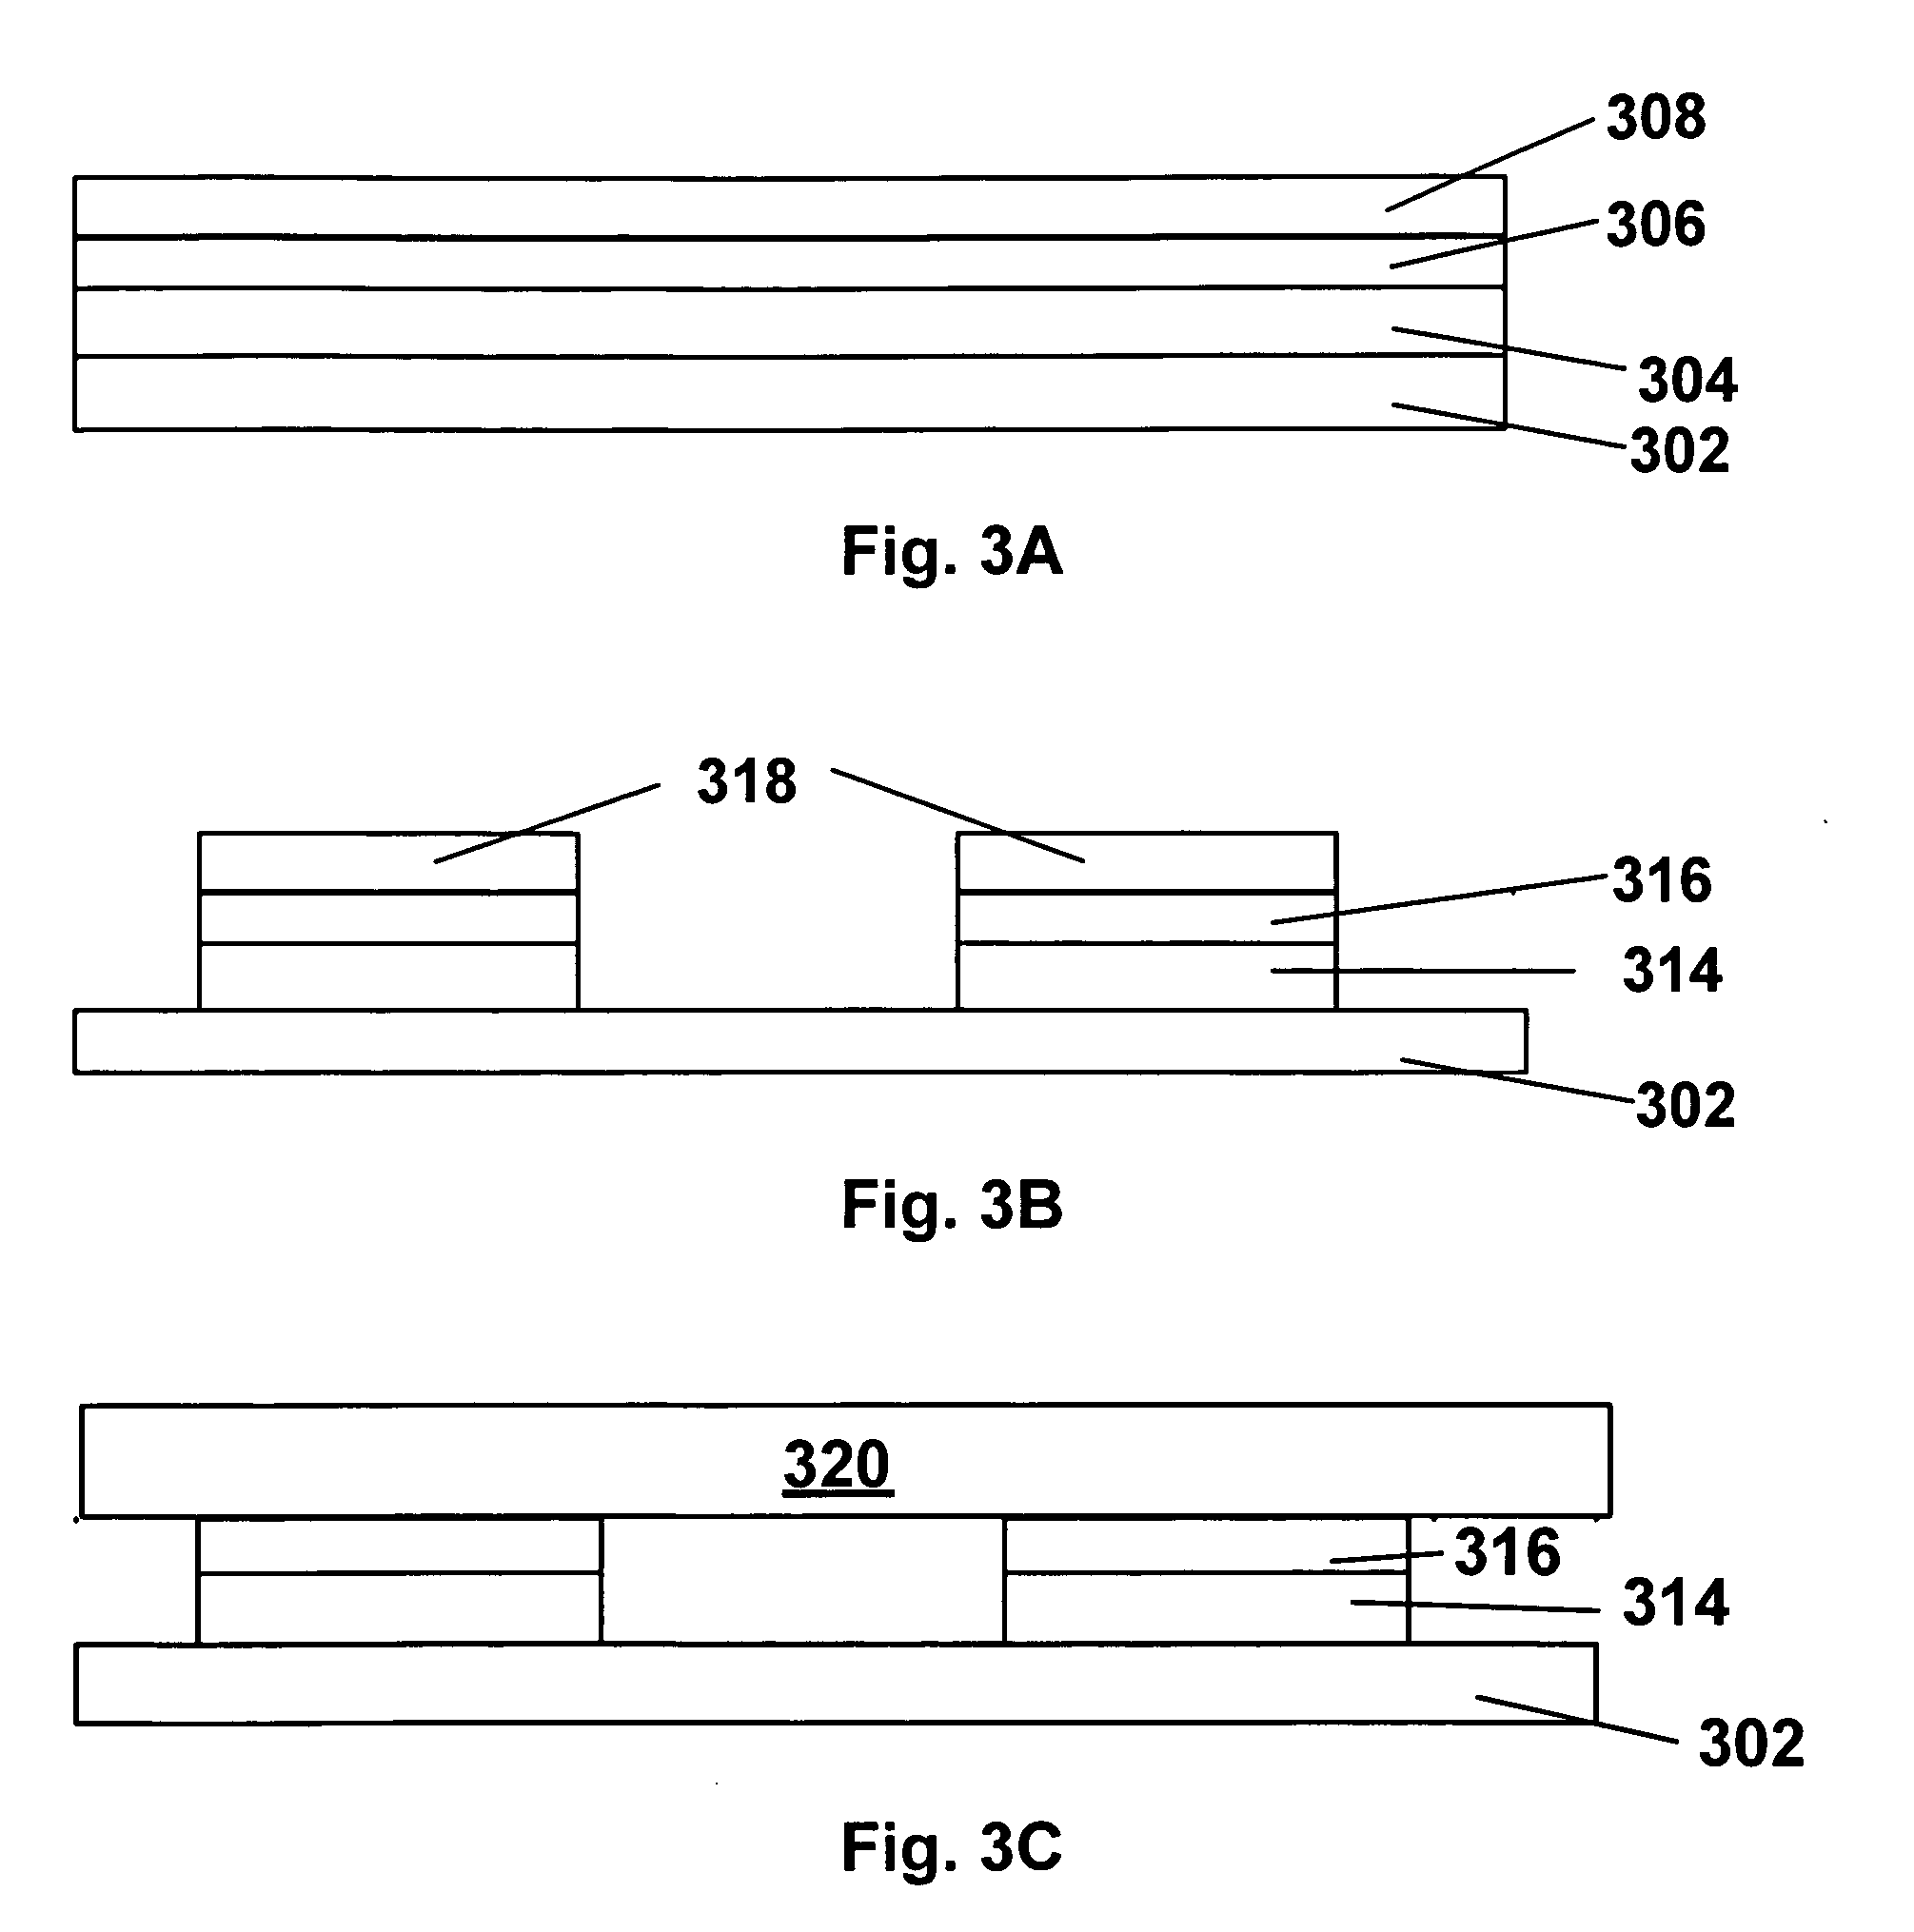 Electro-optic displays, and materials and methods for production thereof